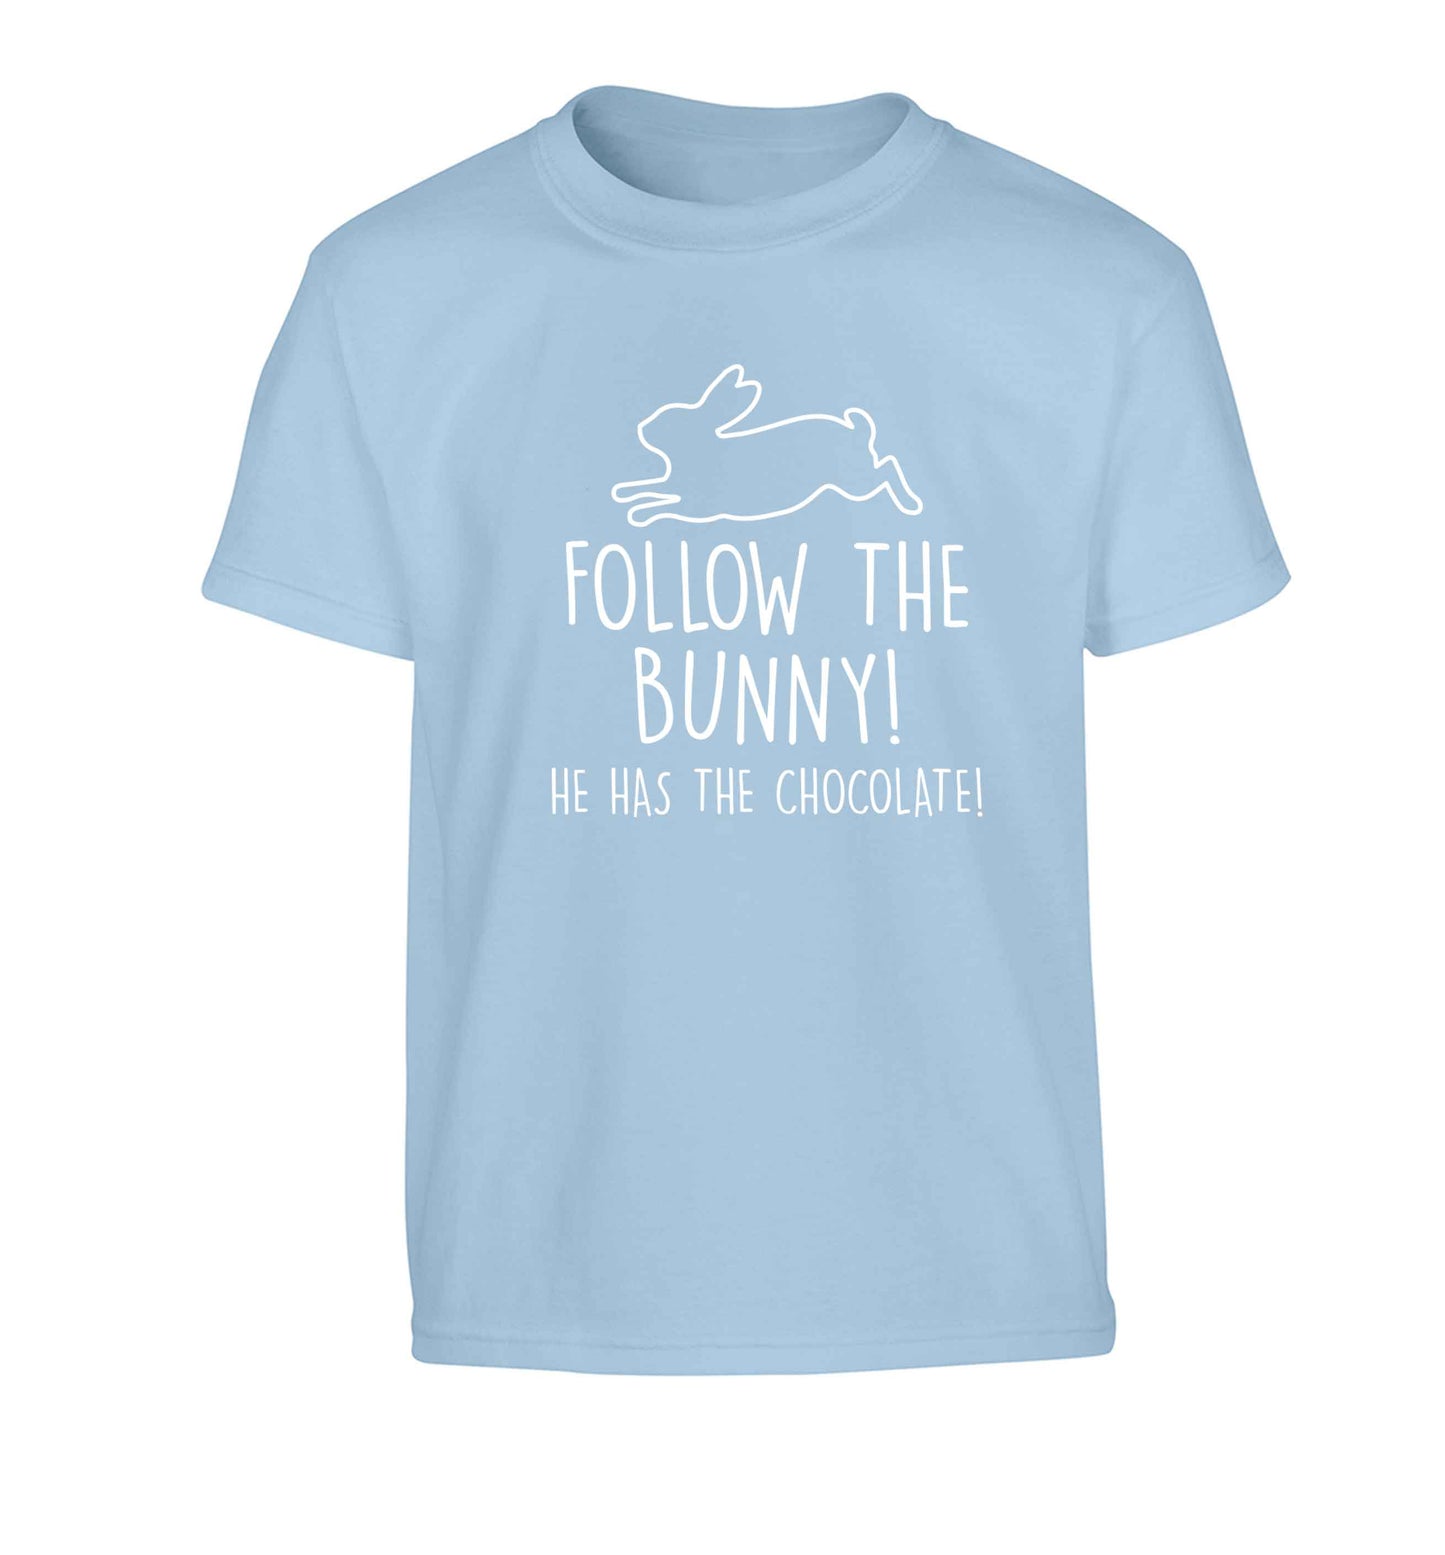 Follow the bunny! He has the chocolate Children's light blue Tshirt 12-13 Years